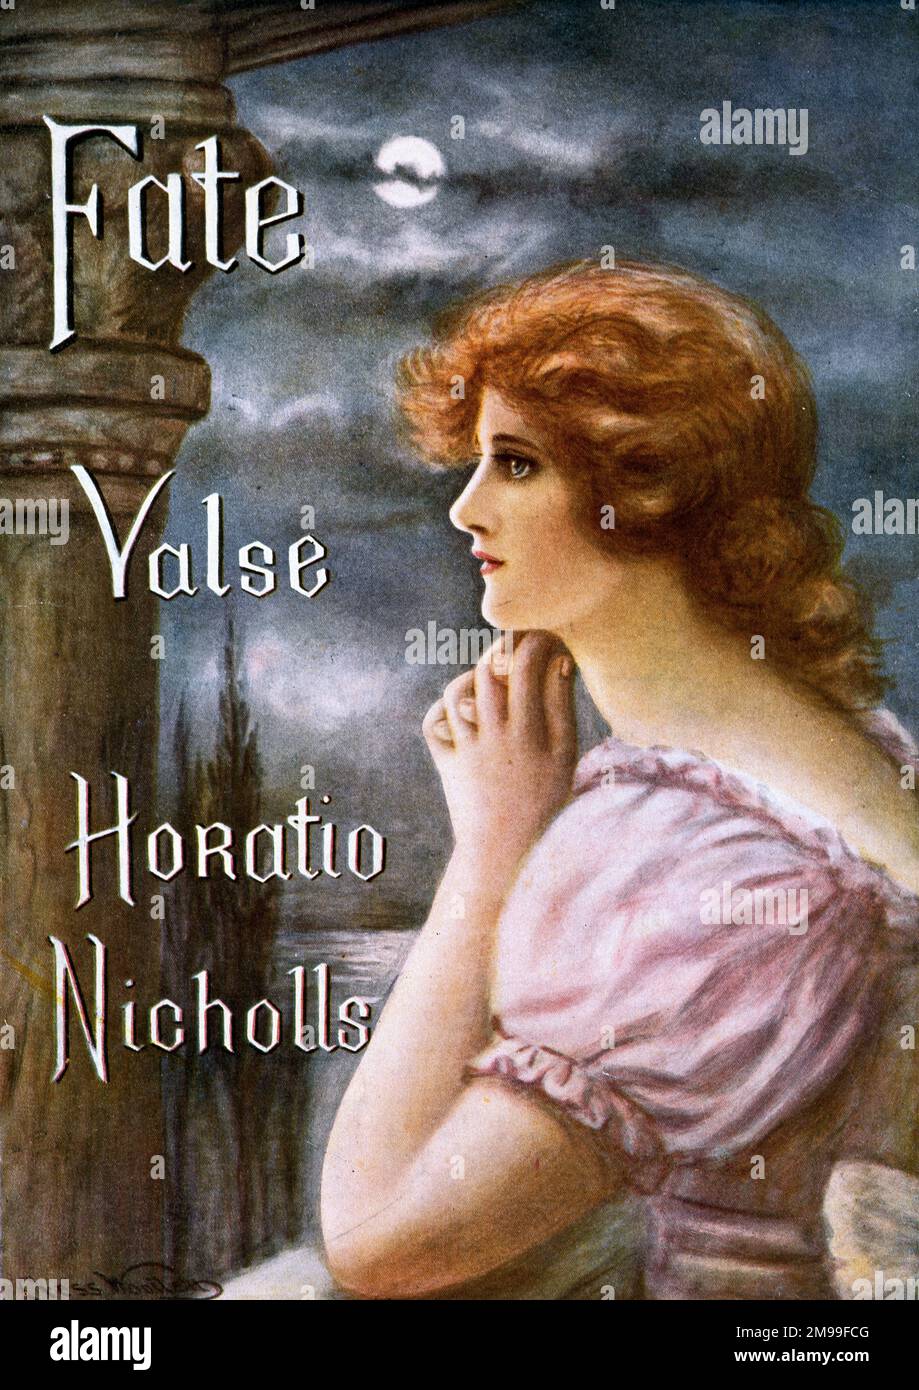 Music cover, Fate Valse (Waltz) by Horatio Nicholls. Stock Photo